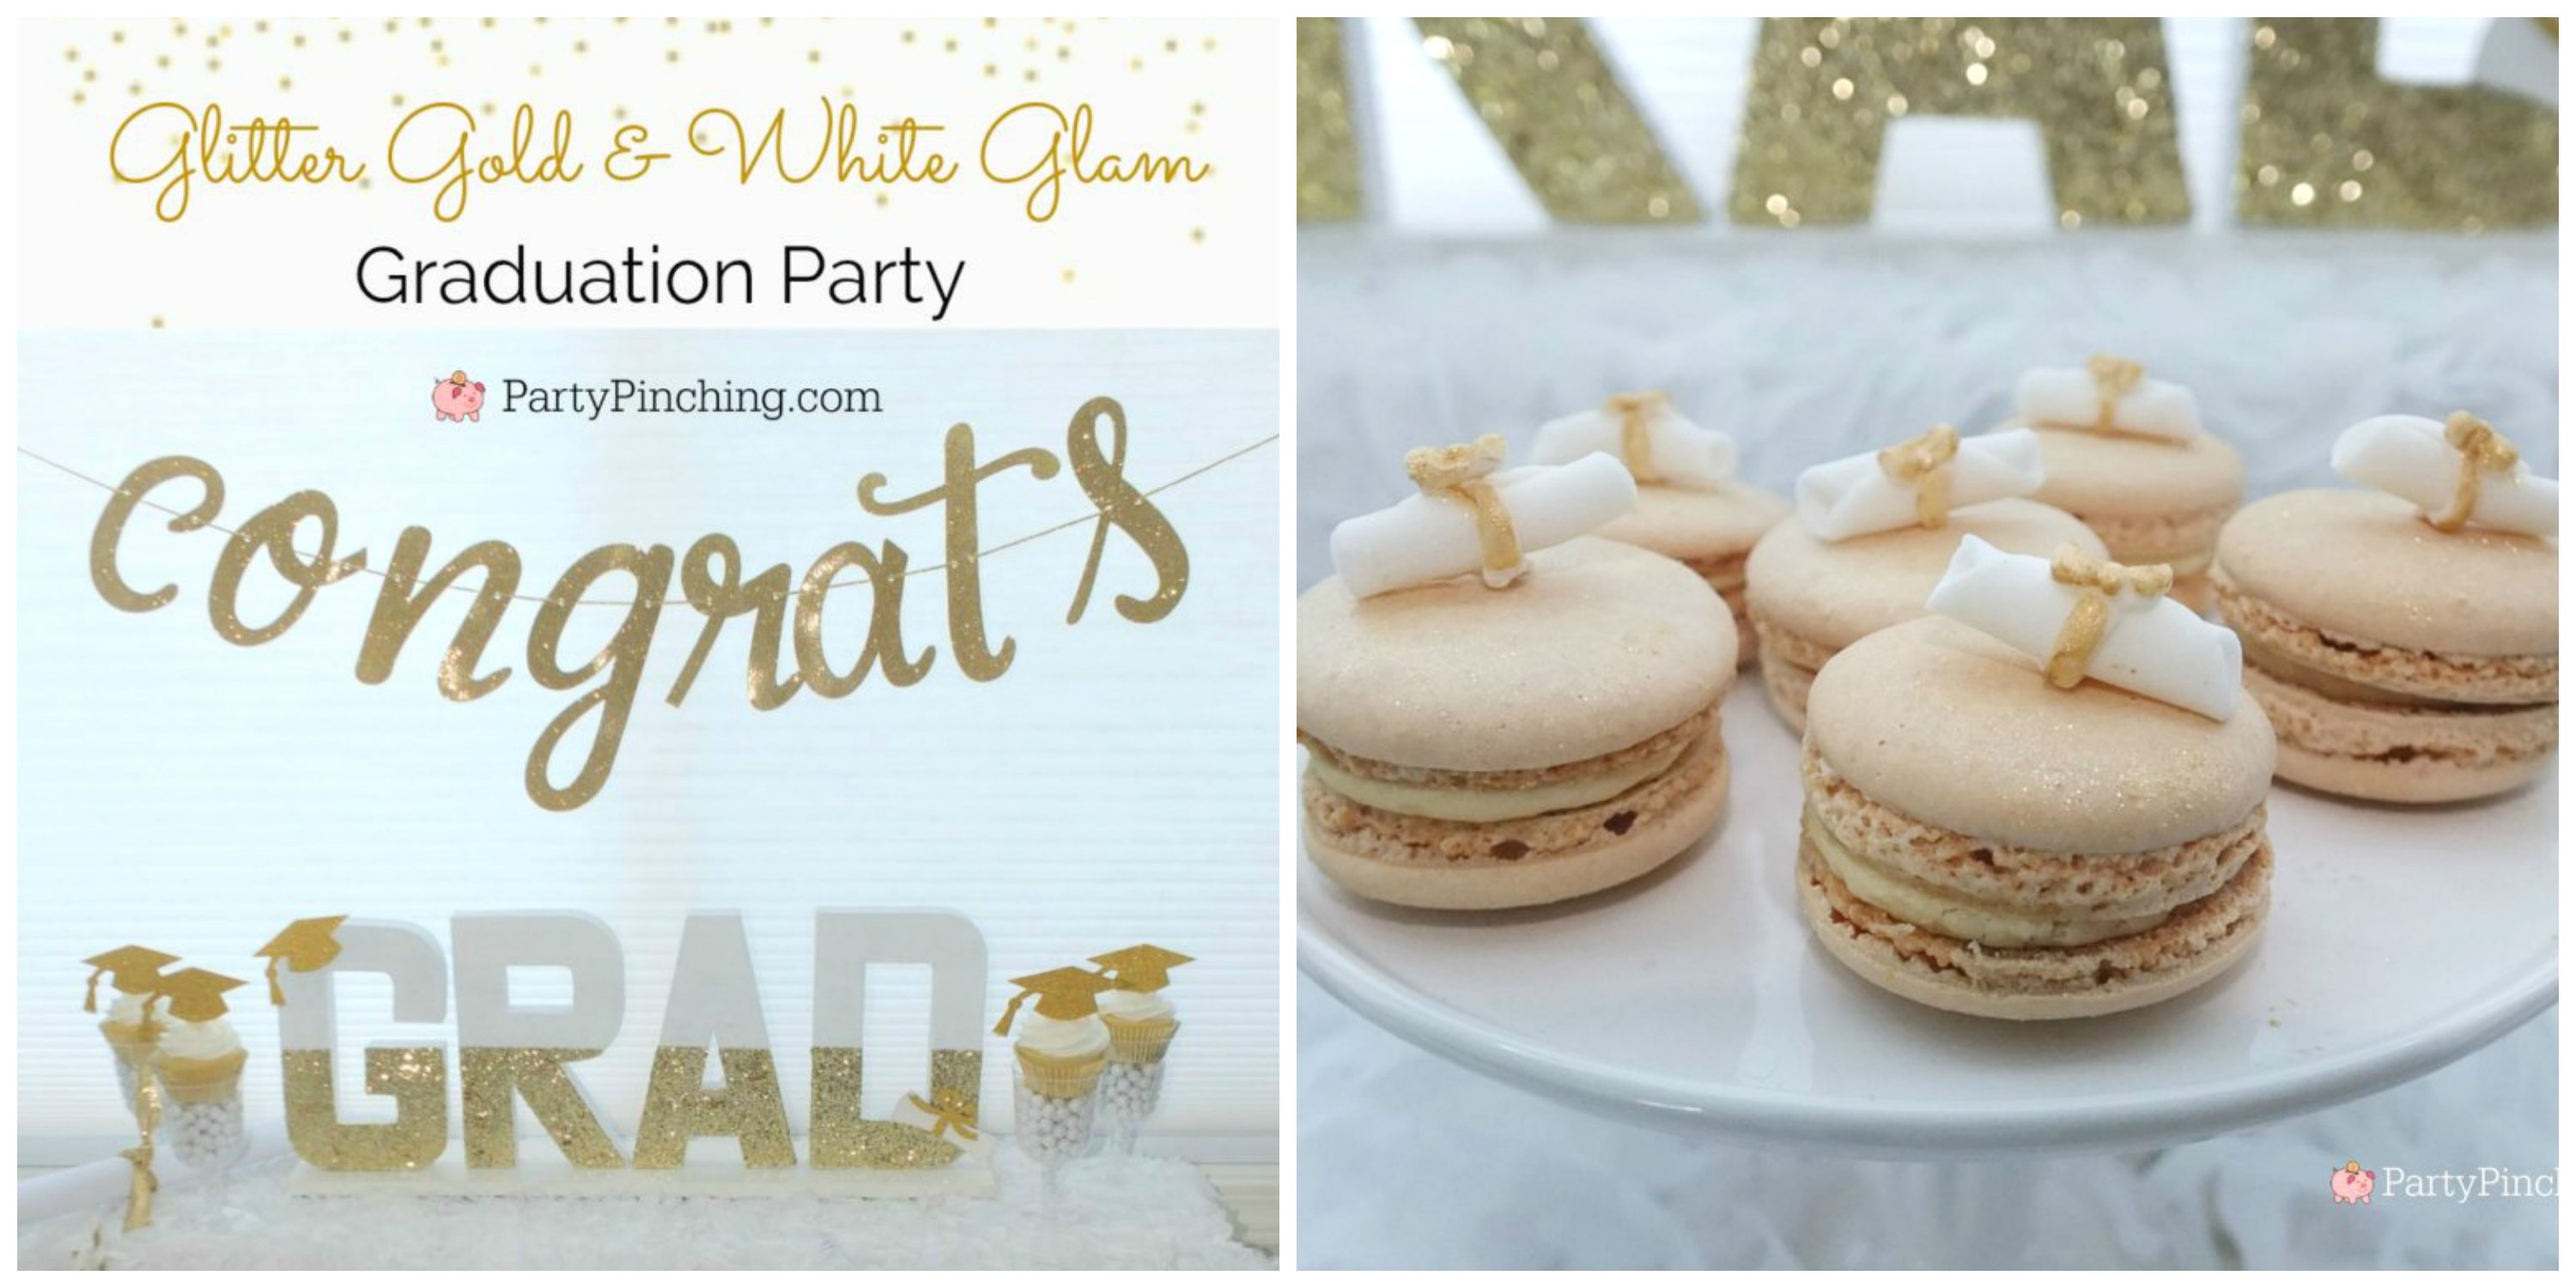 Pin on Glam & Sparkly parties